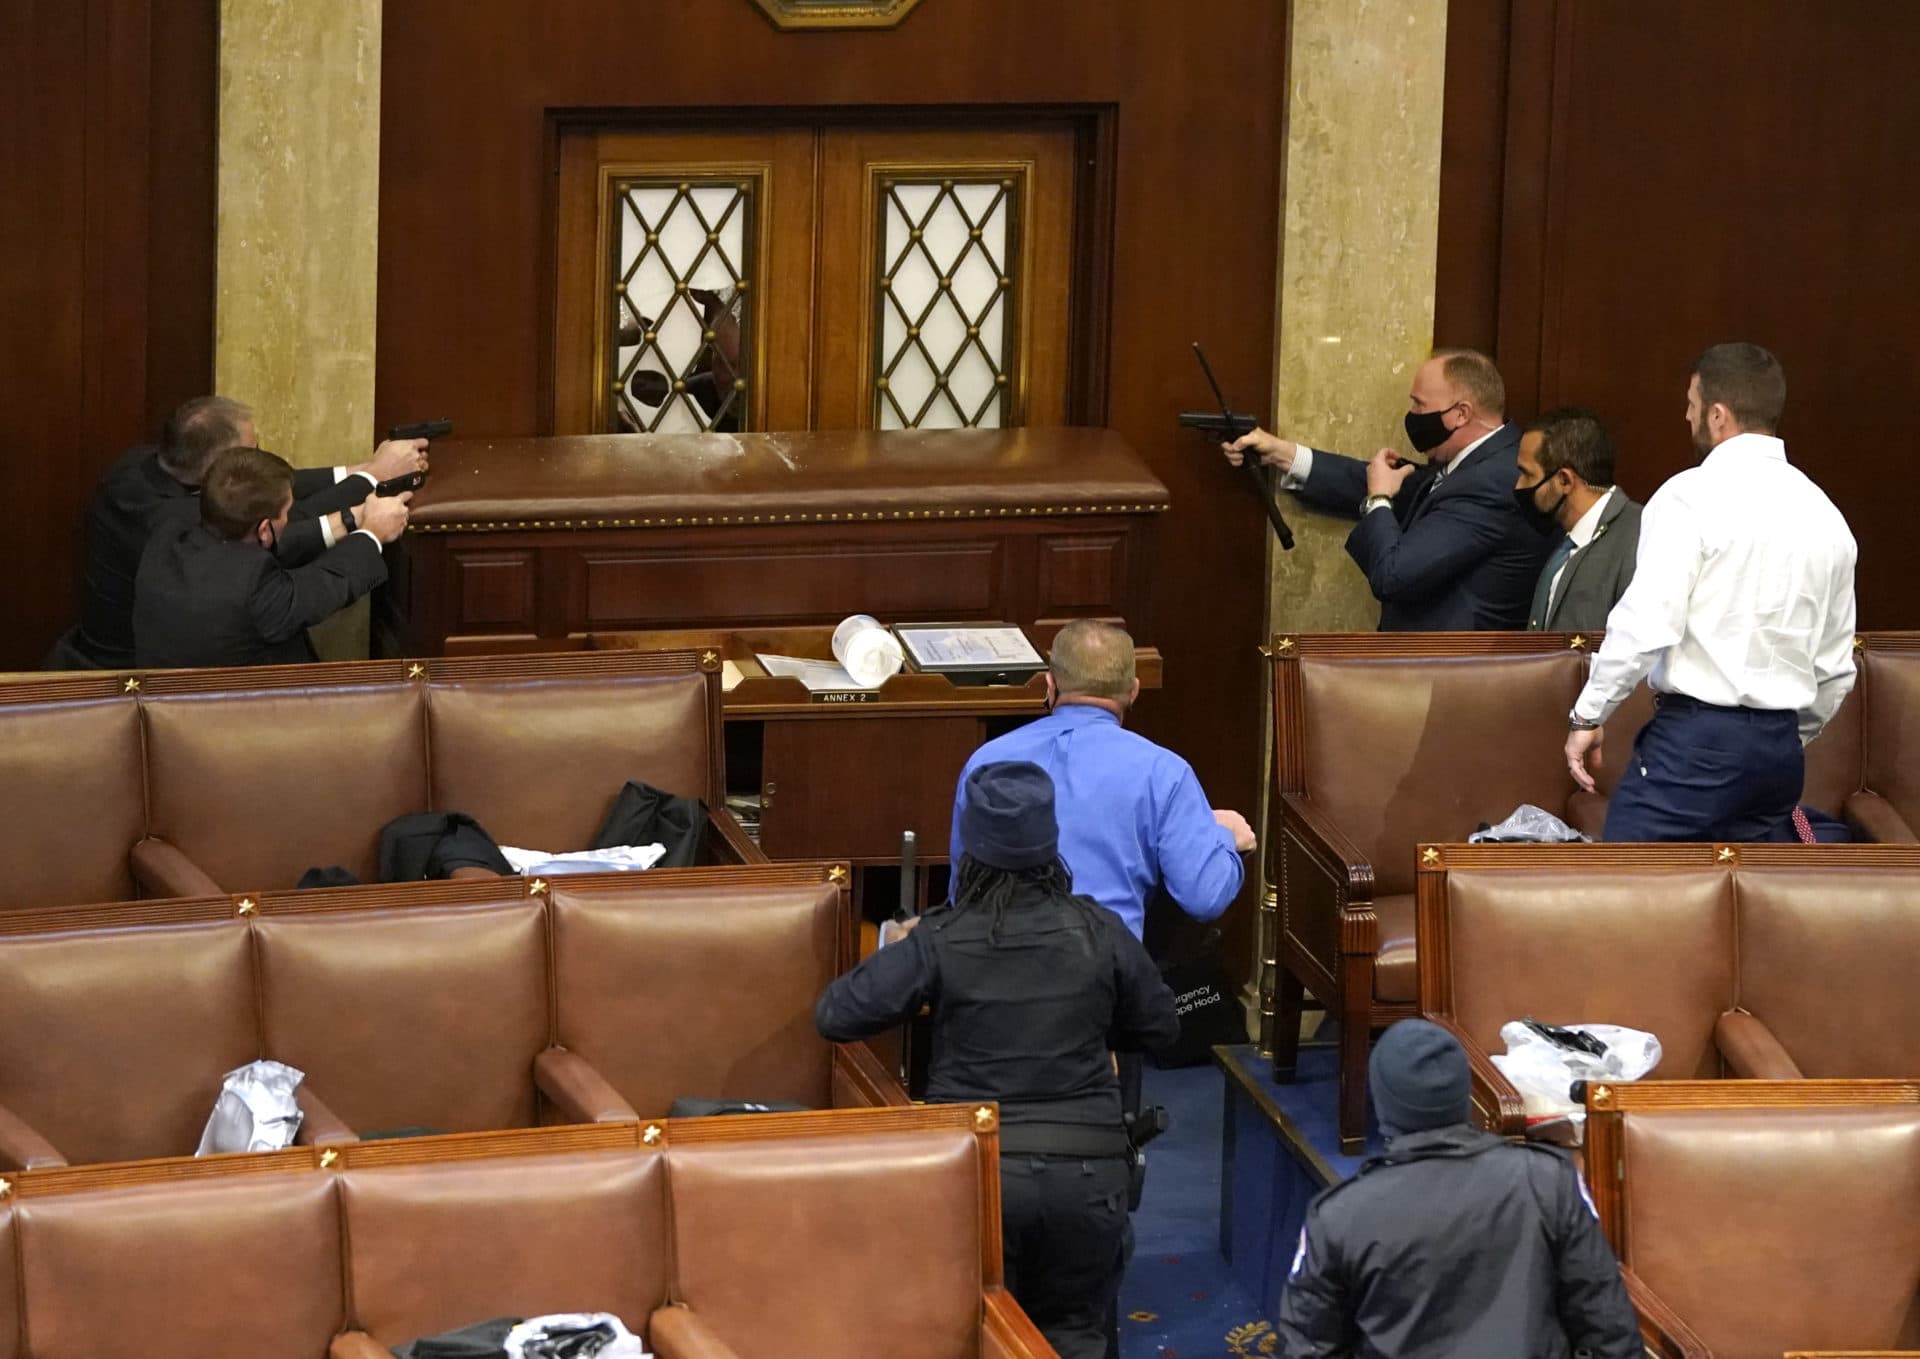 Capitol police officers point their guns at a door that was vandalized in the House Chamber during a joint session of Congress on Wednesday. (Drew Angerer/Getty Images)